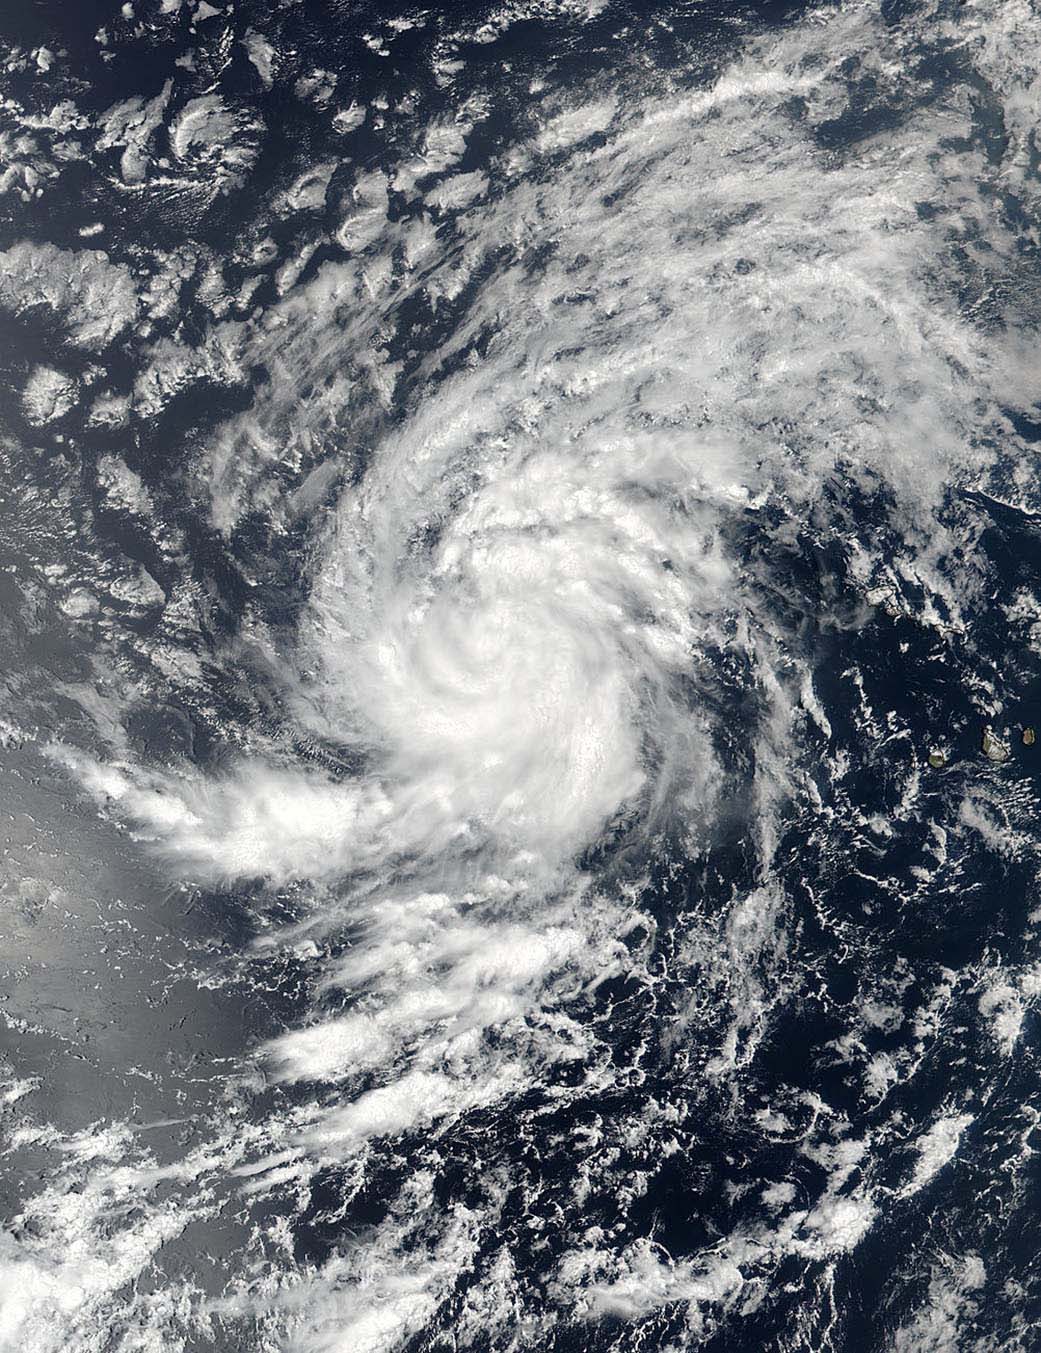 Satellite image of Tropical Storm Irma pictured here in the Eastern Atlantic Ocean on Aug. 30, 2017. (NASA—Reuters)